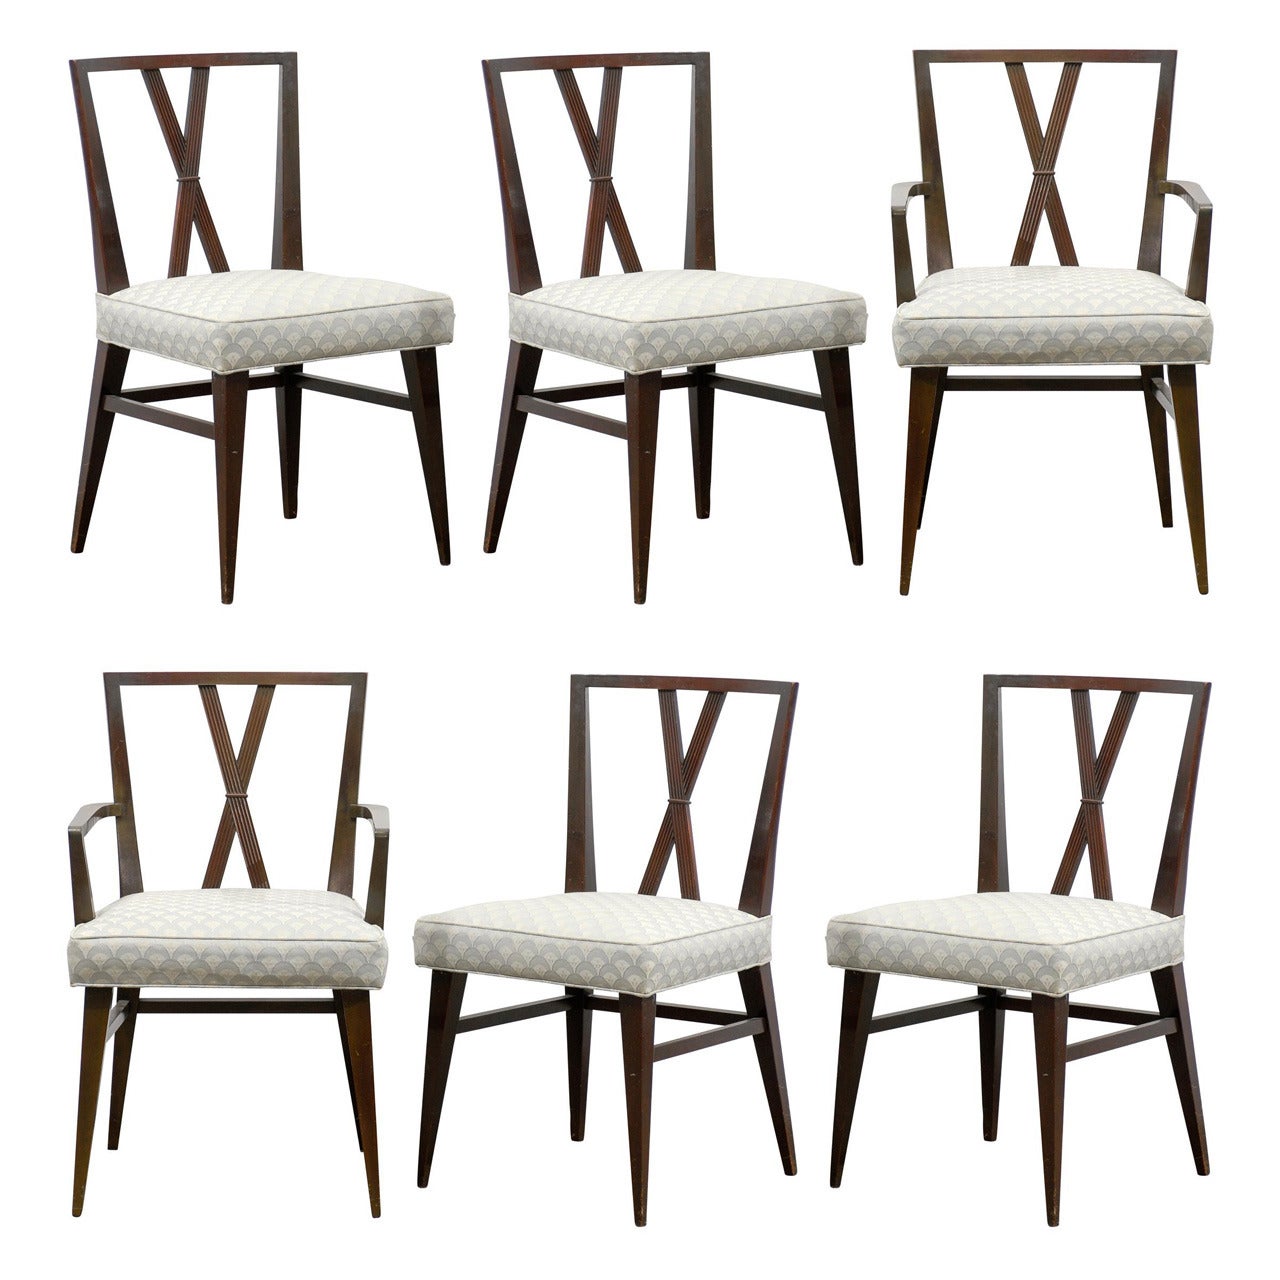 Exquisite Set of Six ( 6 ) Dining Chairs by Tommi Parzinger for Charak